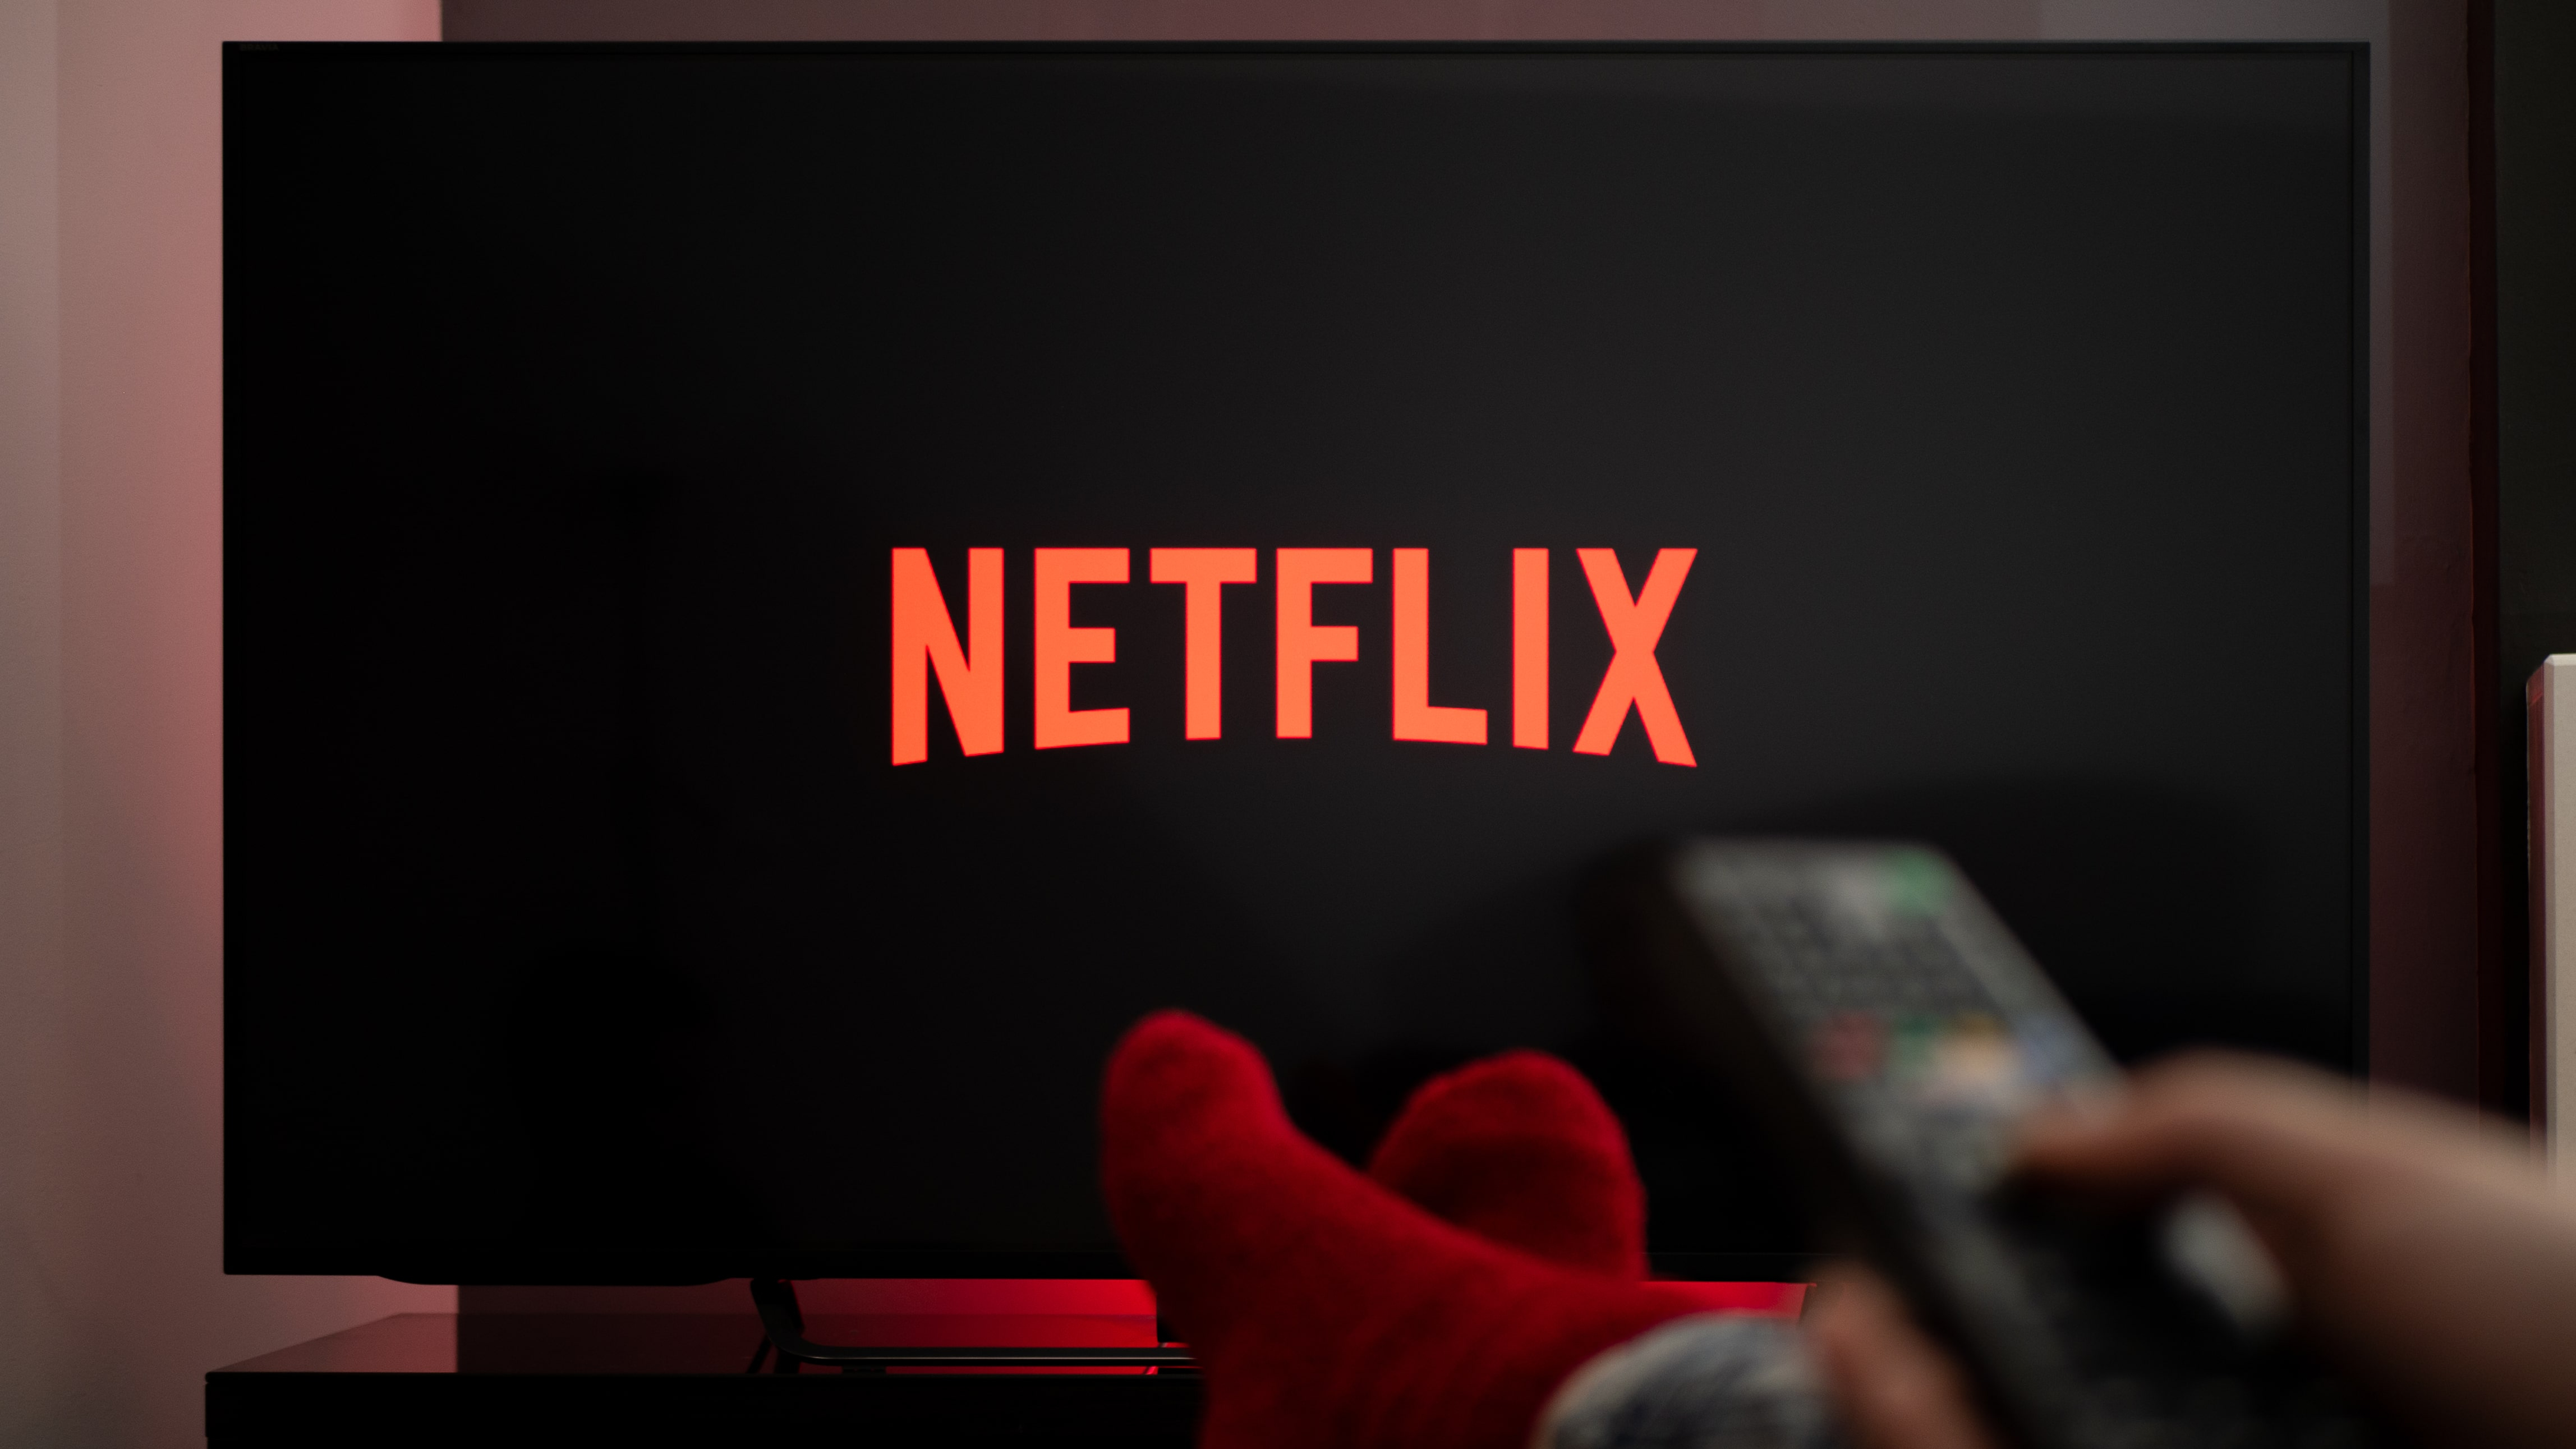 A man watching Netflix on TV with his feet resting on a table in front of him